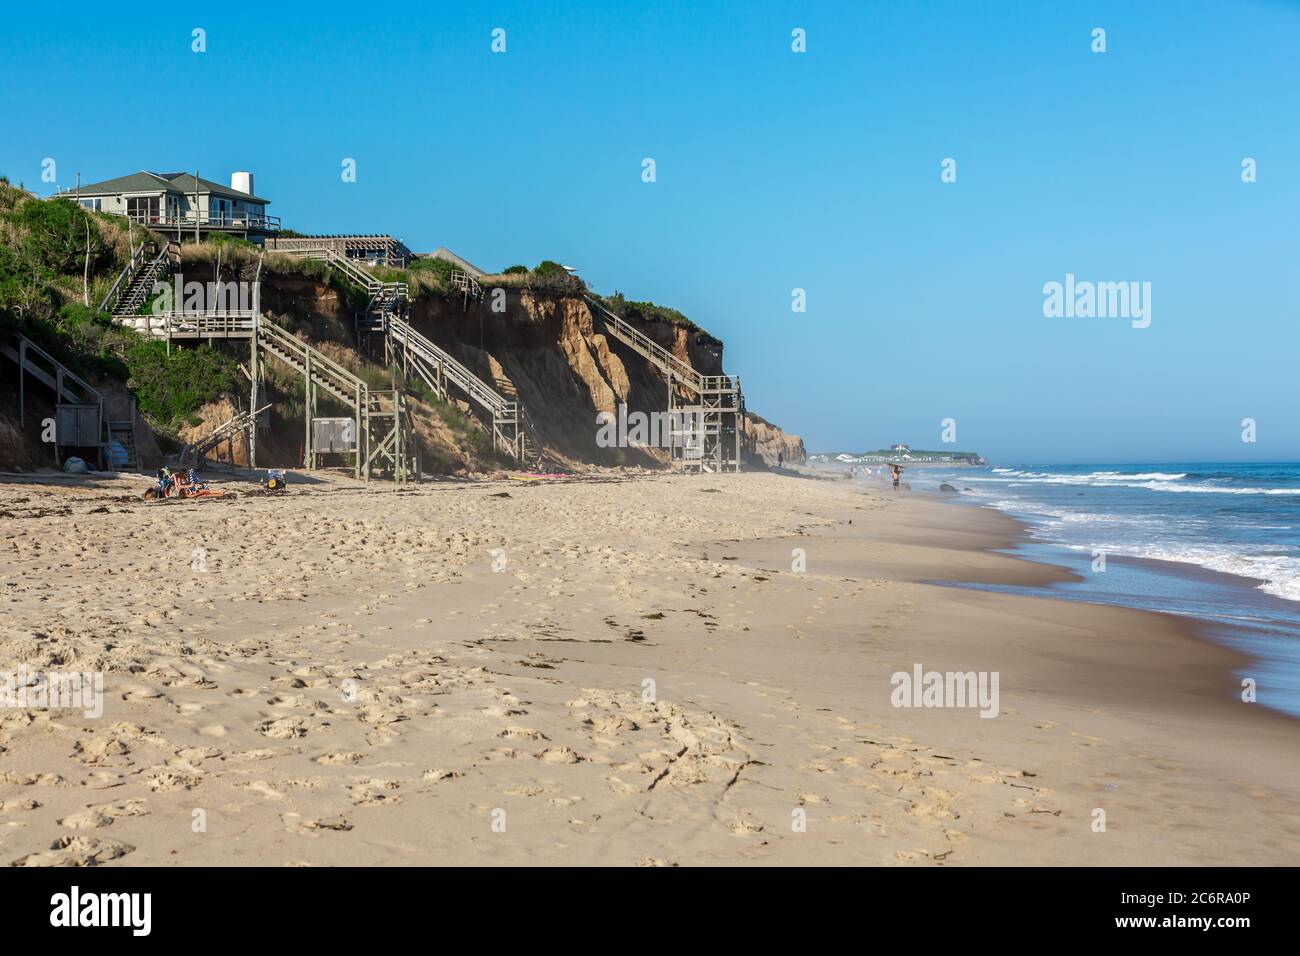 Landscape image of the beach in Montauk, NY looking east at the bluffs Stock Photo